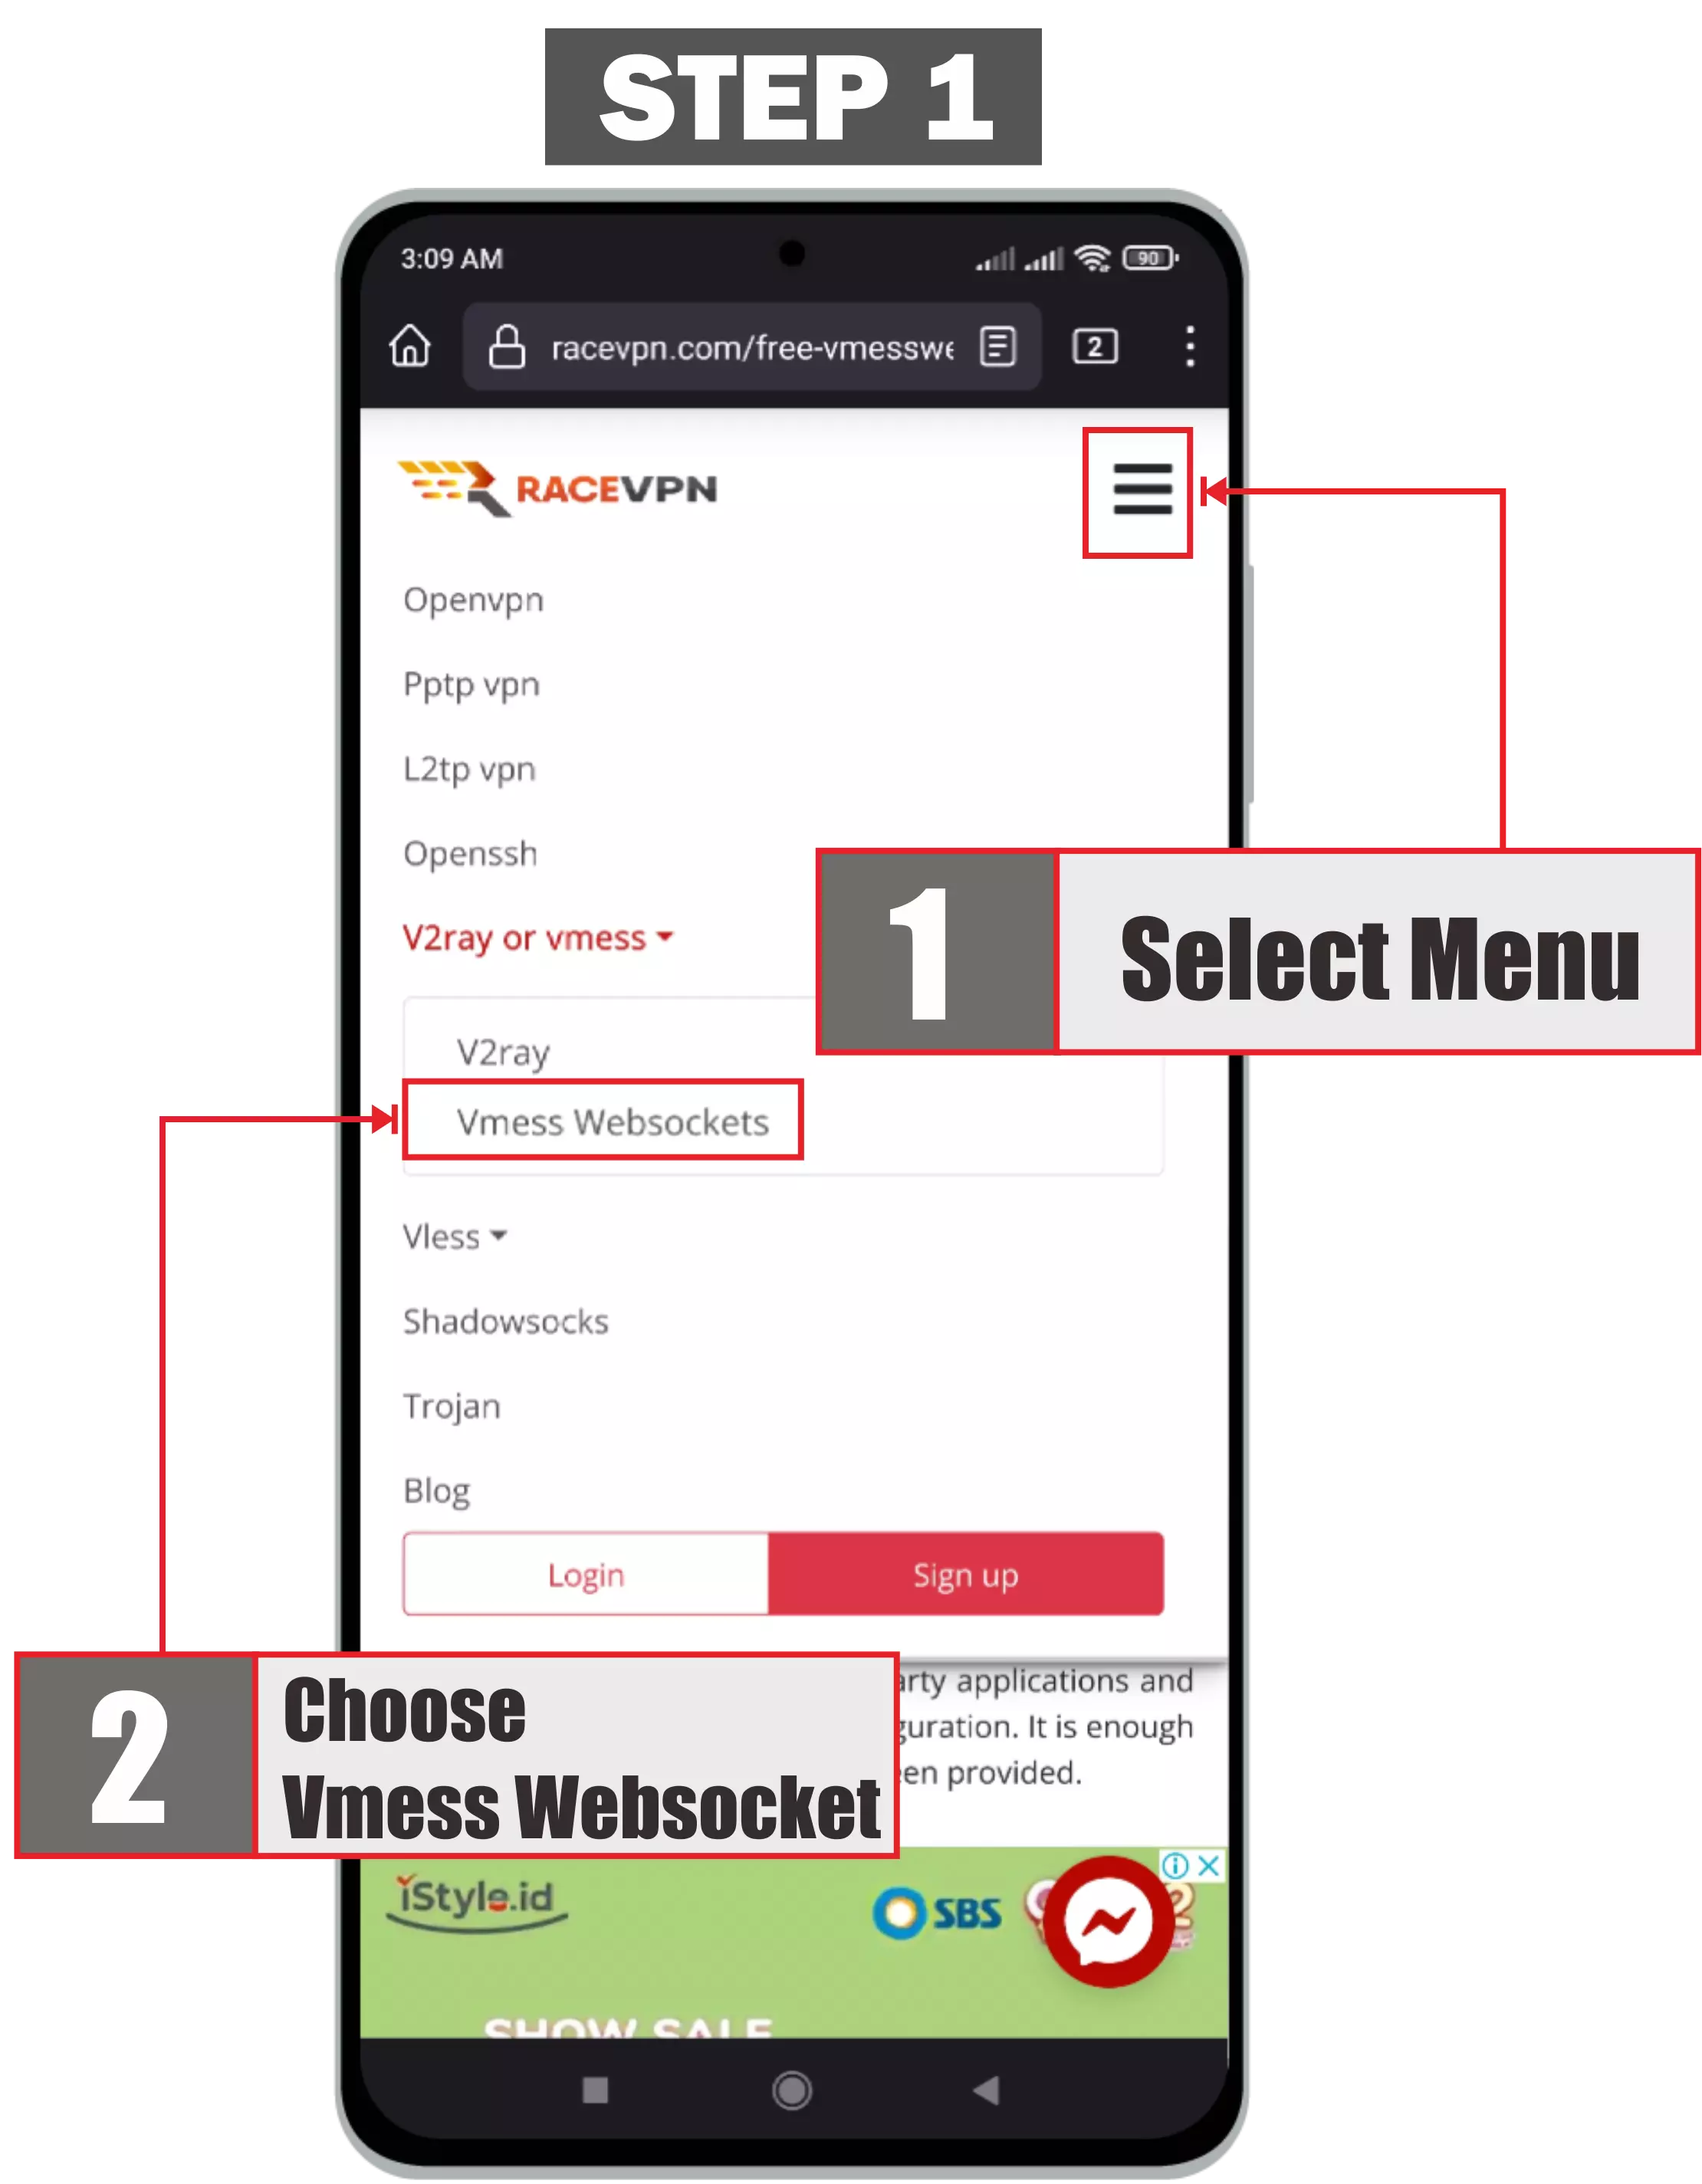 The first step is how to use v2ray on android